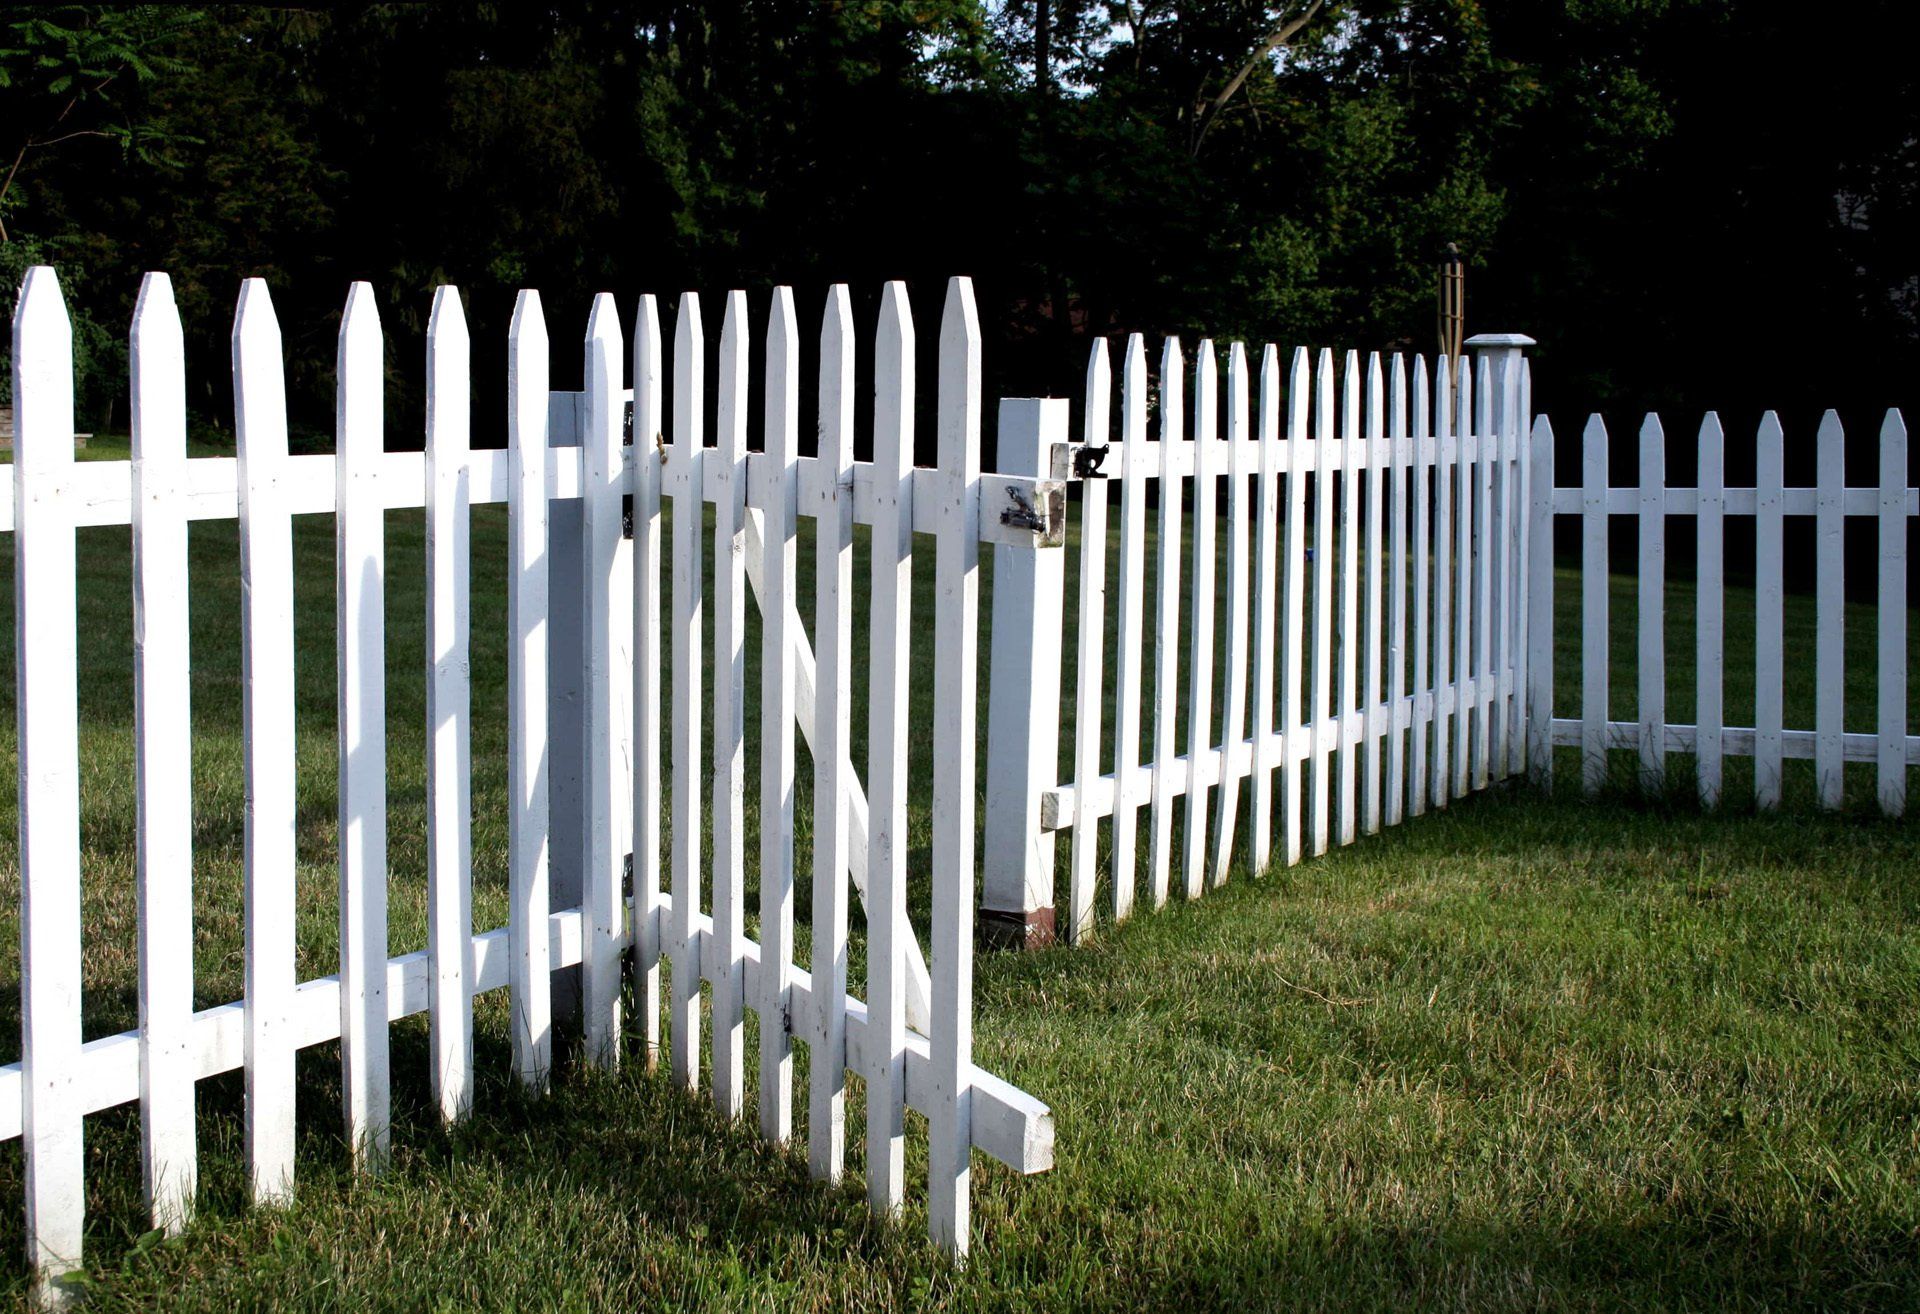 Vinyl fence is the ornate fencing material